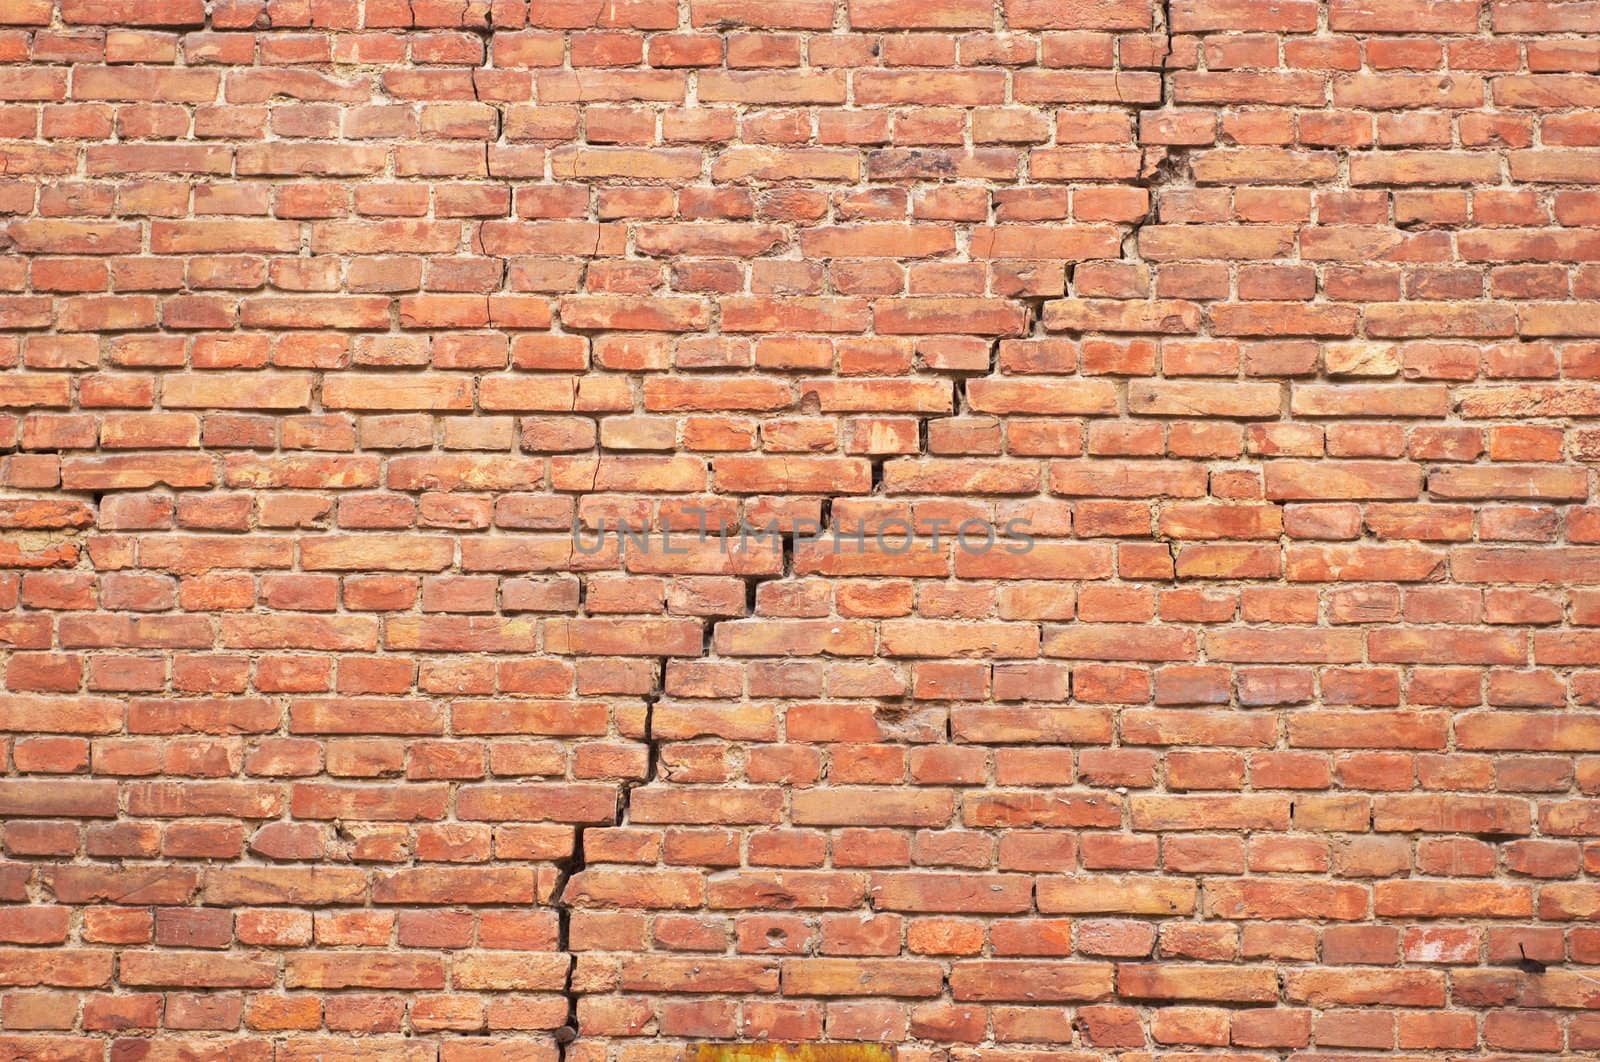 cracked redbrick wall by starush